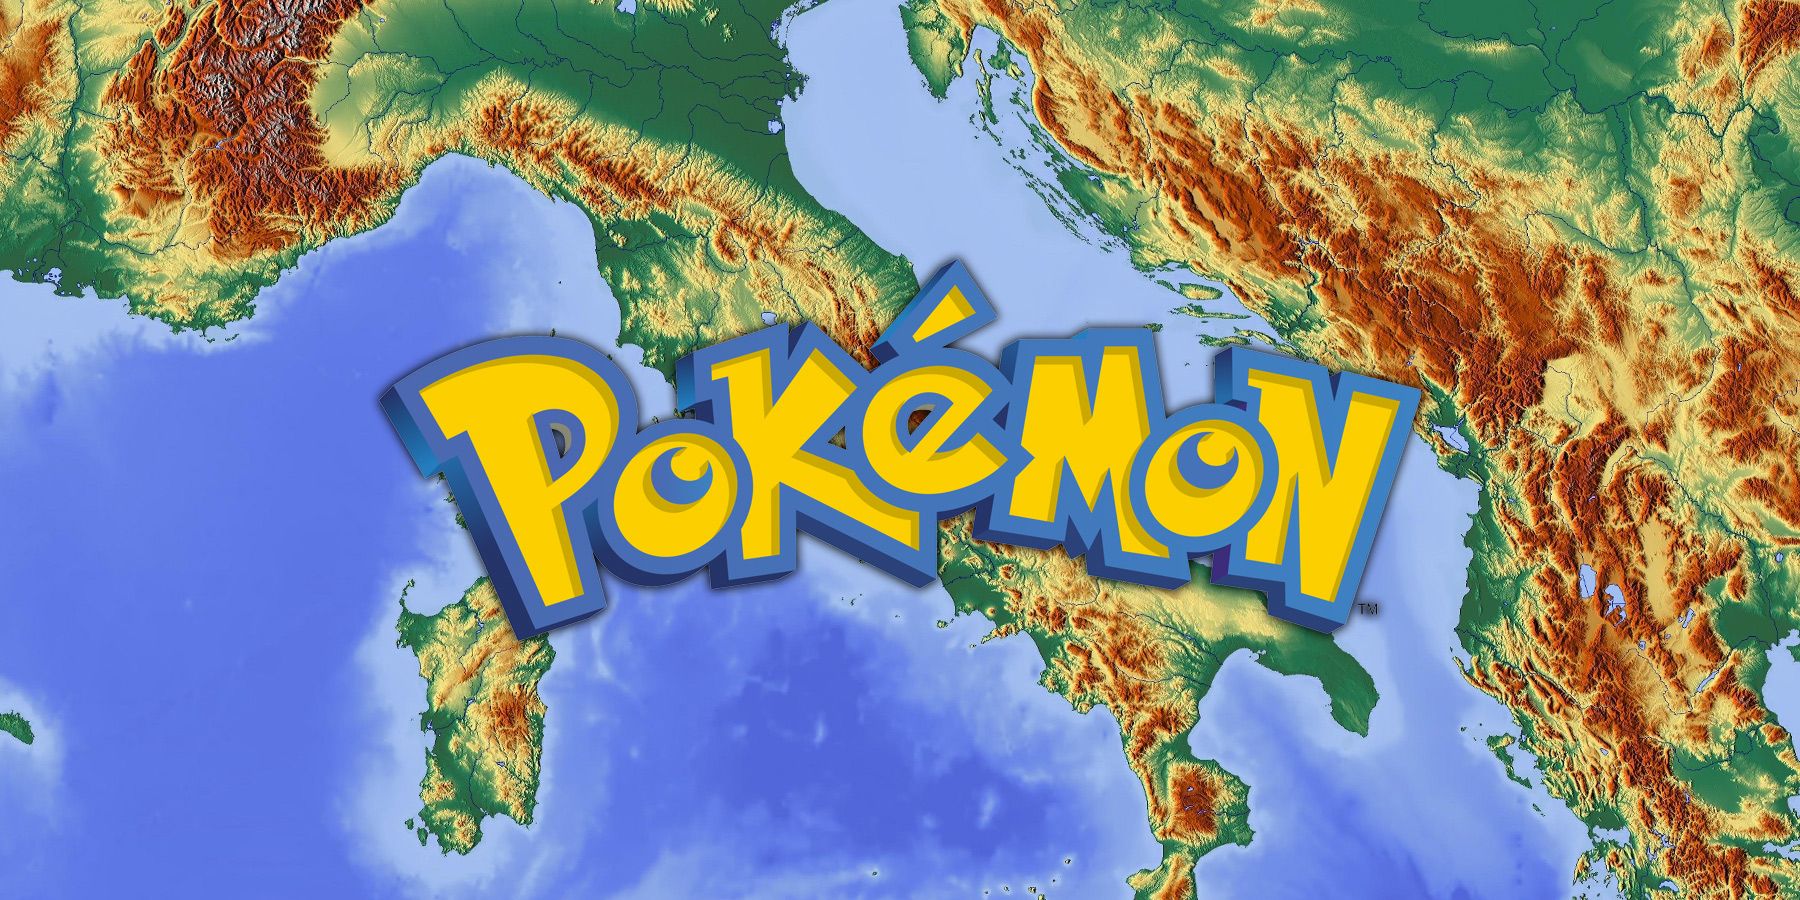 What to Expect From the Pokemon Franchise in 2022